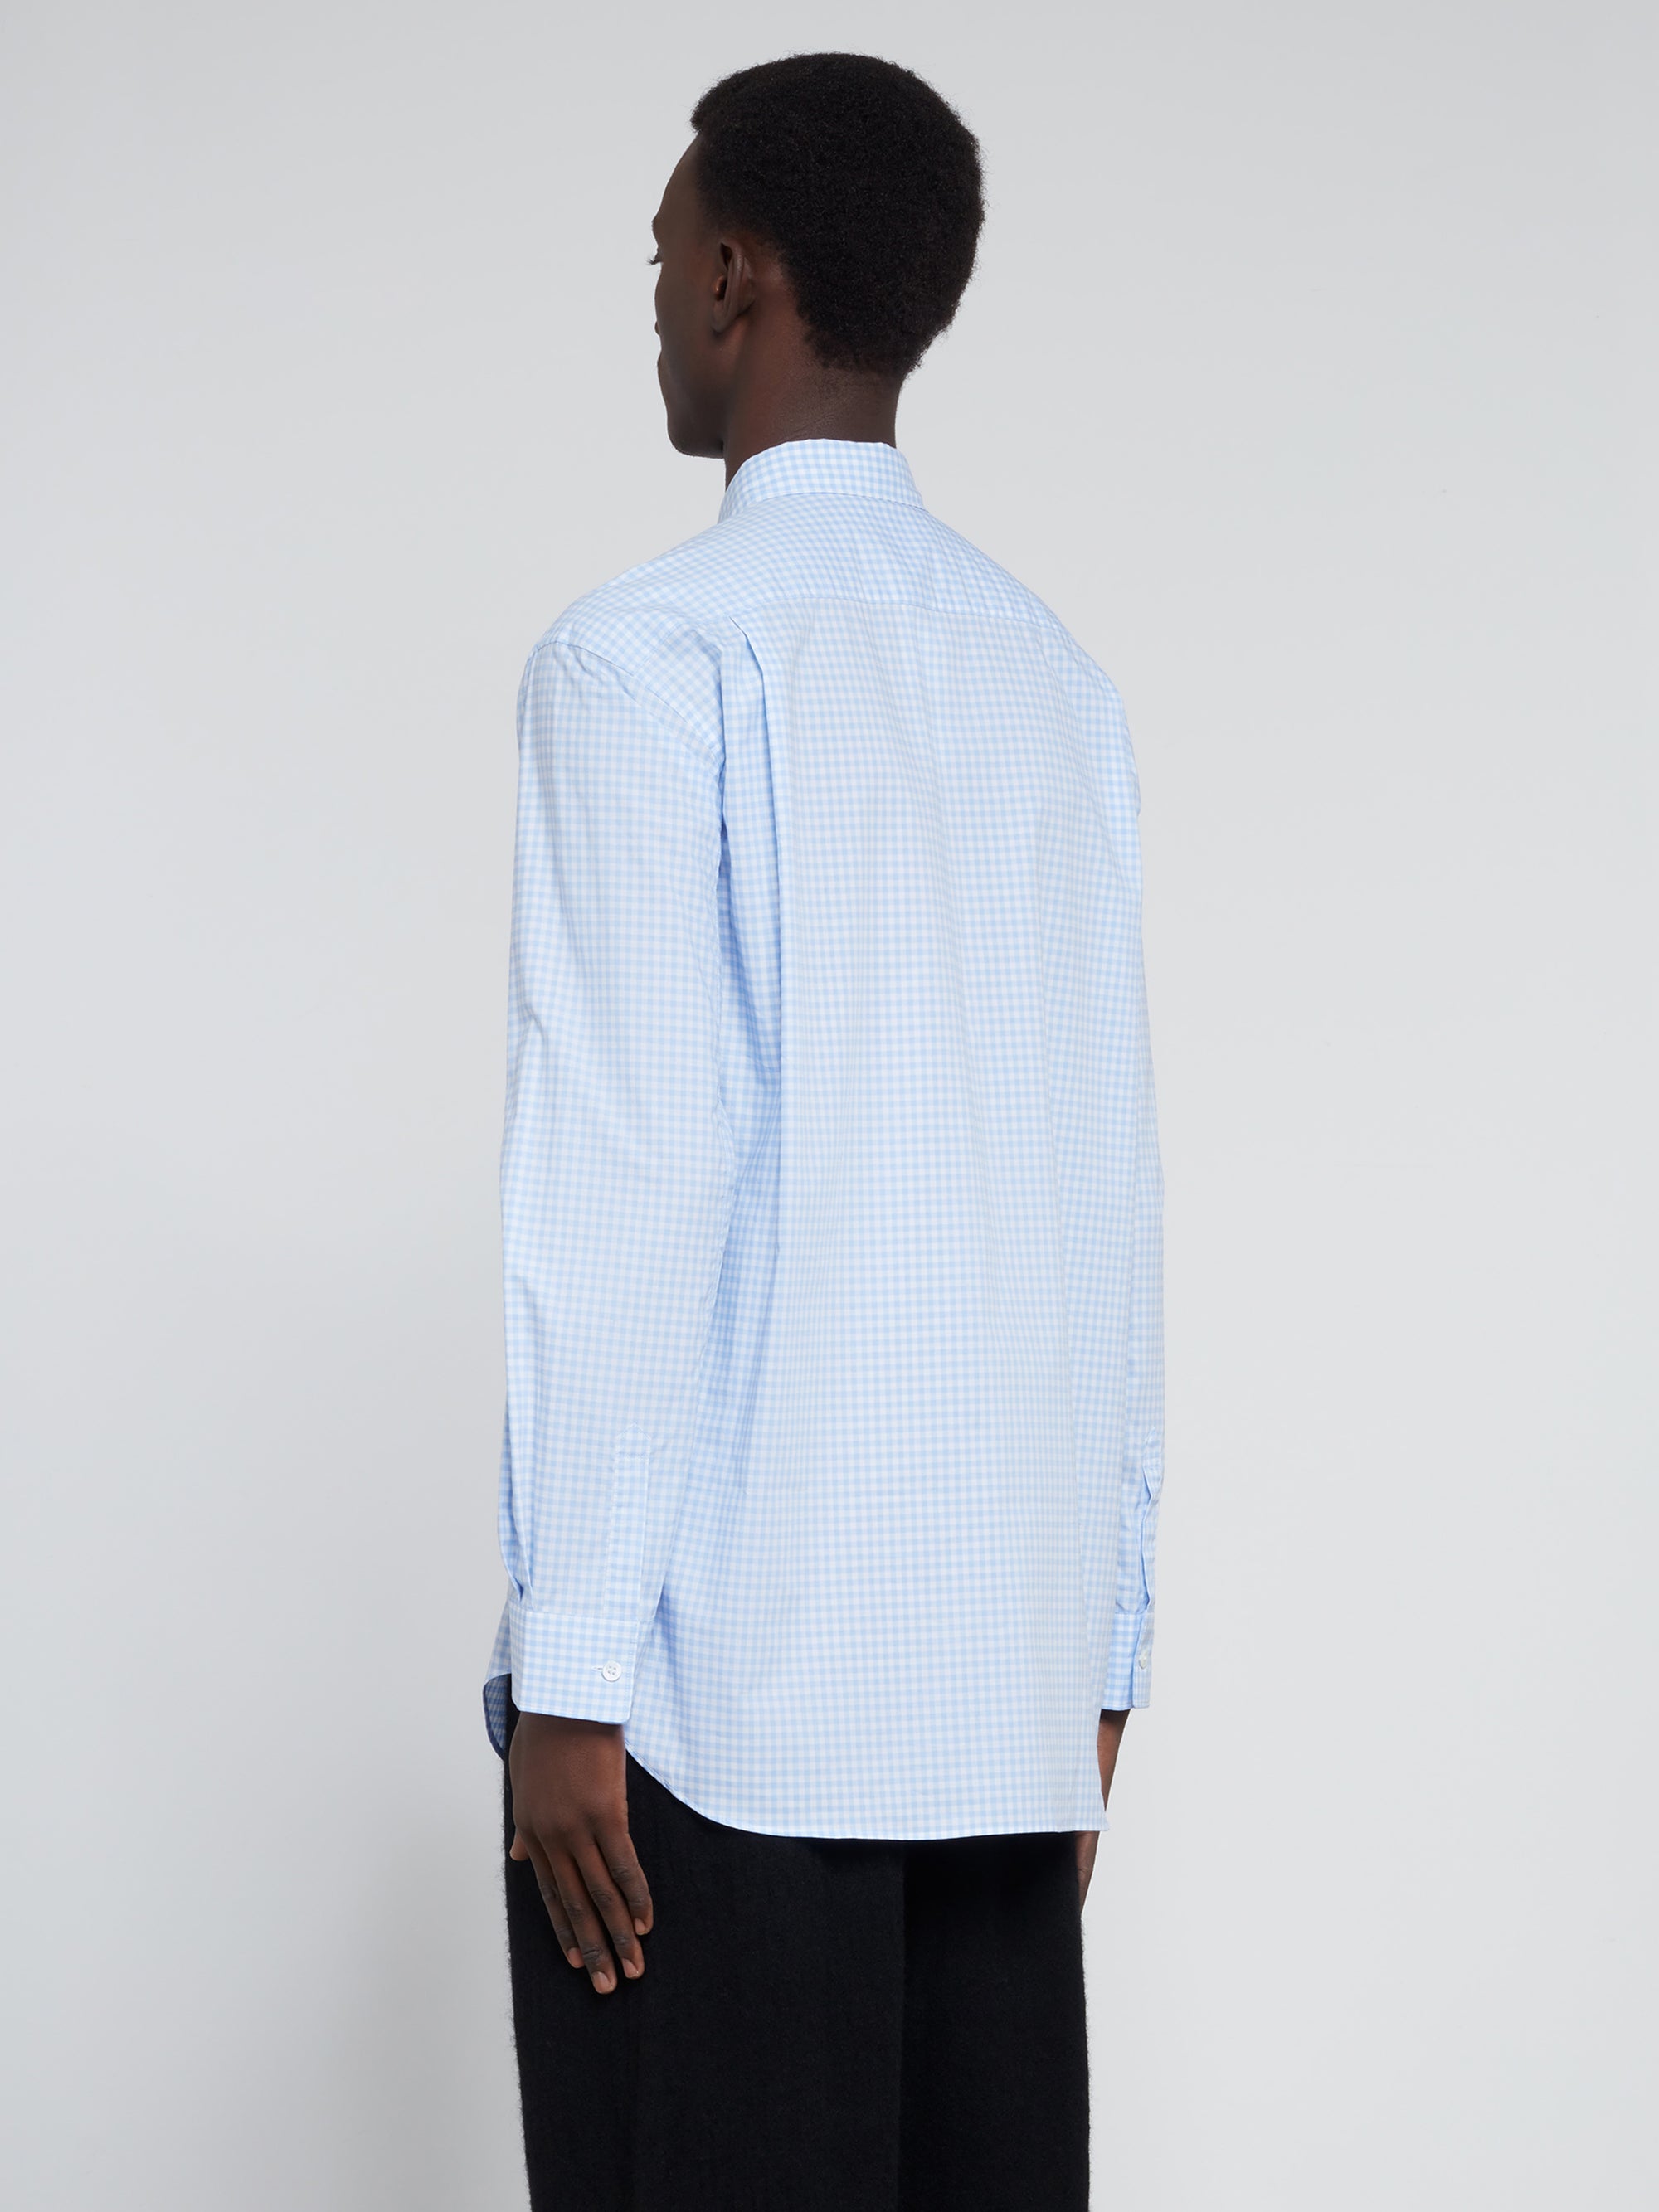 CDG Shirt Forever - Classic Fit Checked Shirt - (Blue) view 4